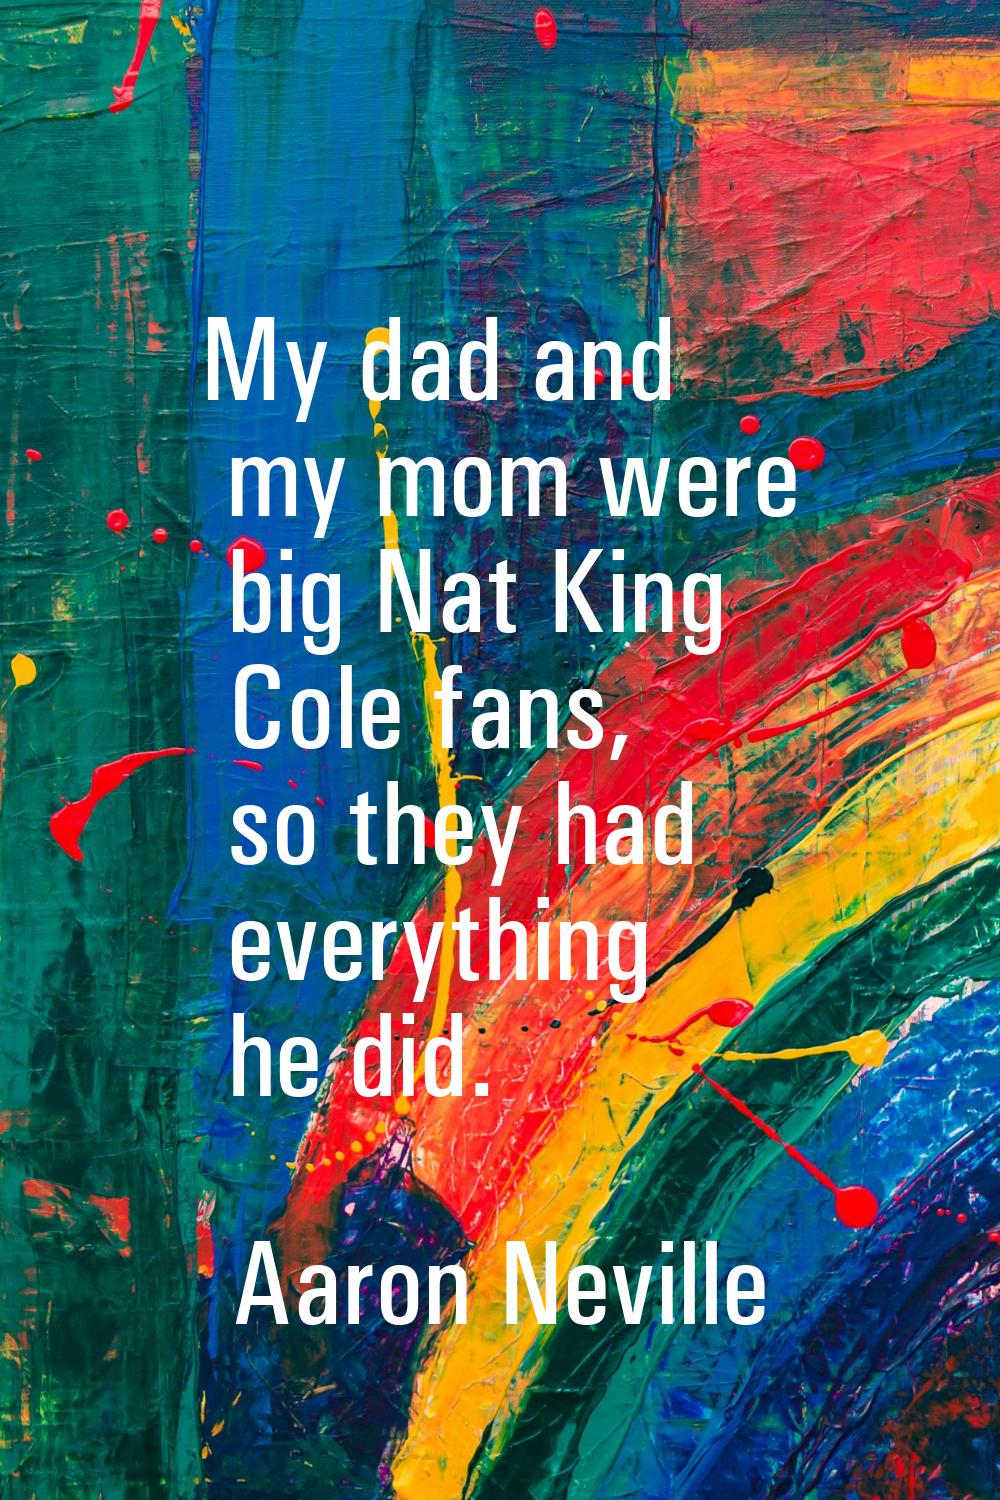 My dad and my mom were big Nat King Cole fans, so they had everything he did.